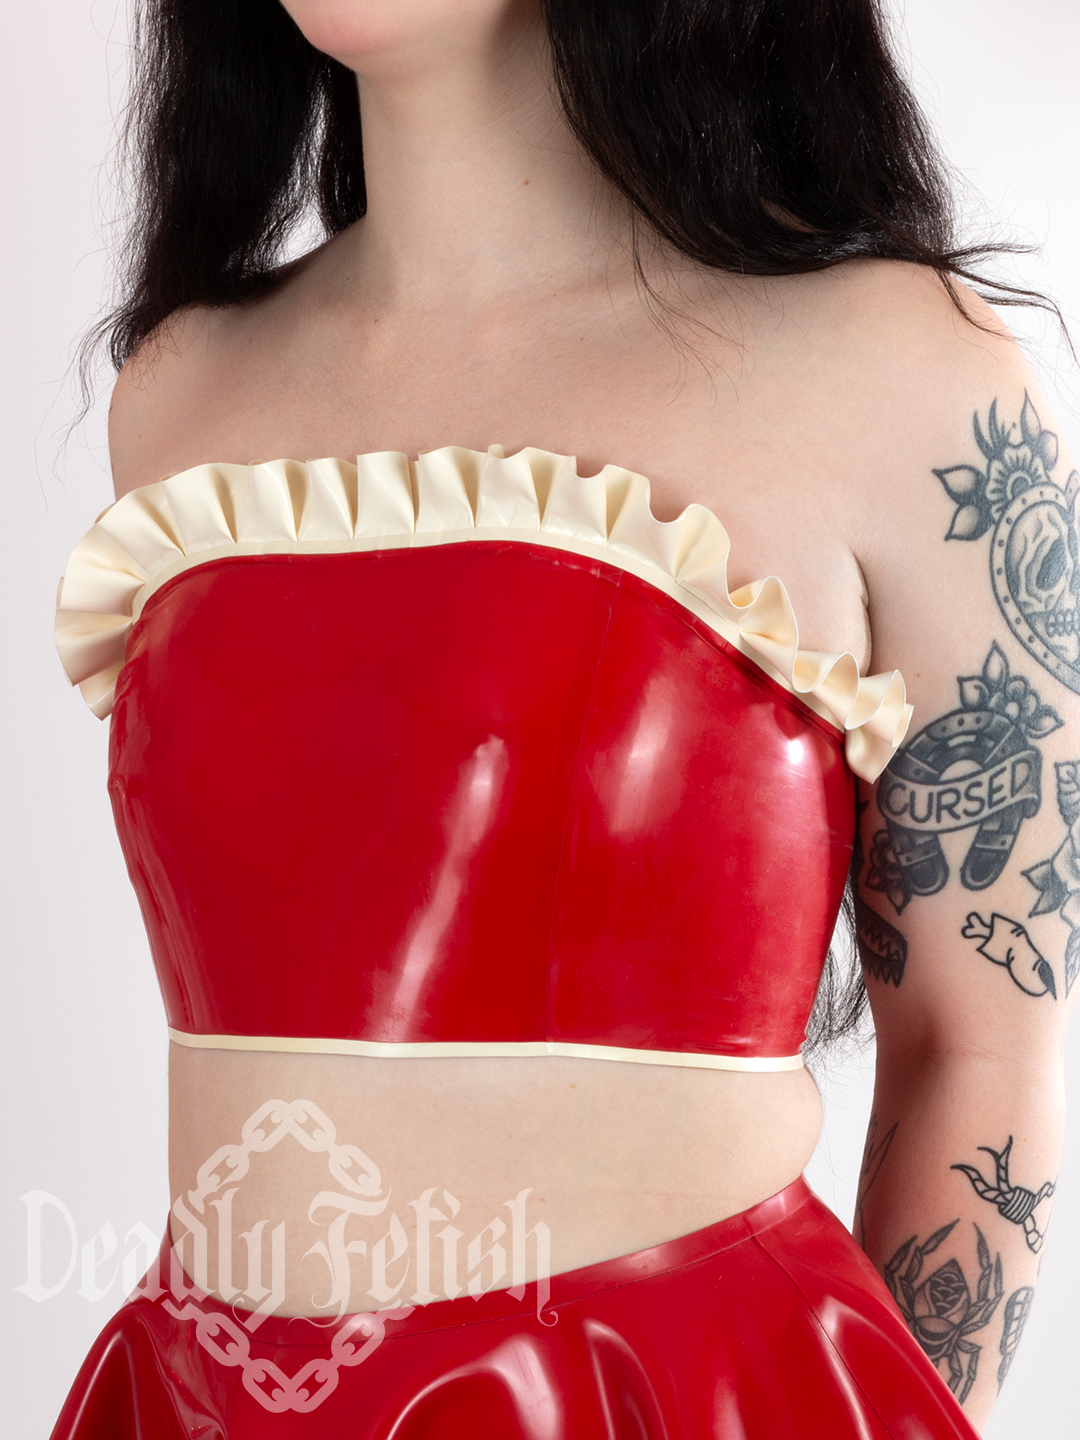 Deadly Fetish Latex: Top #16